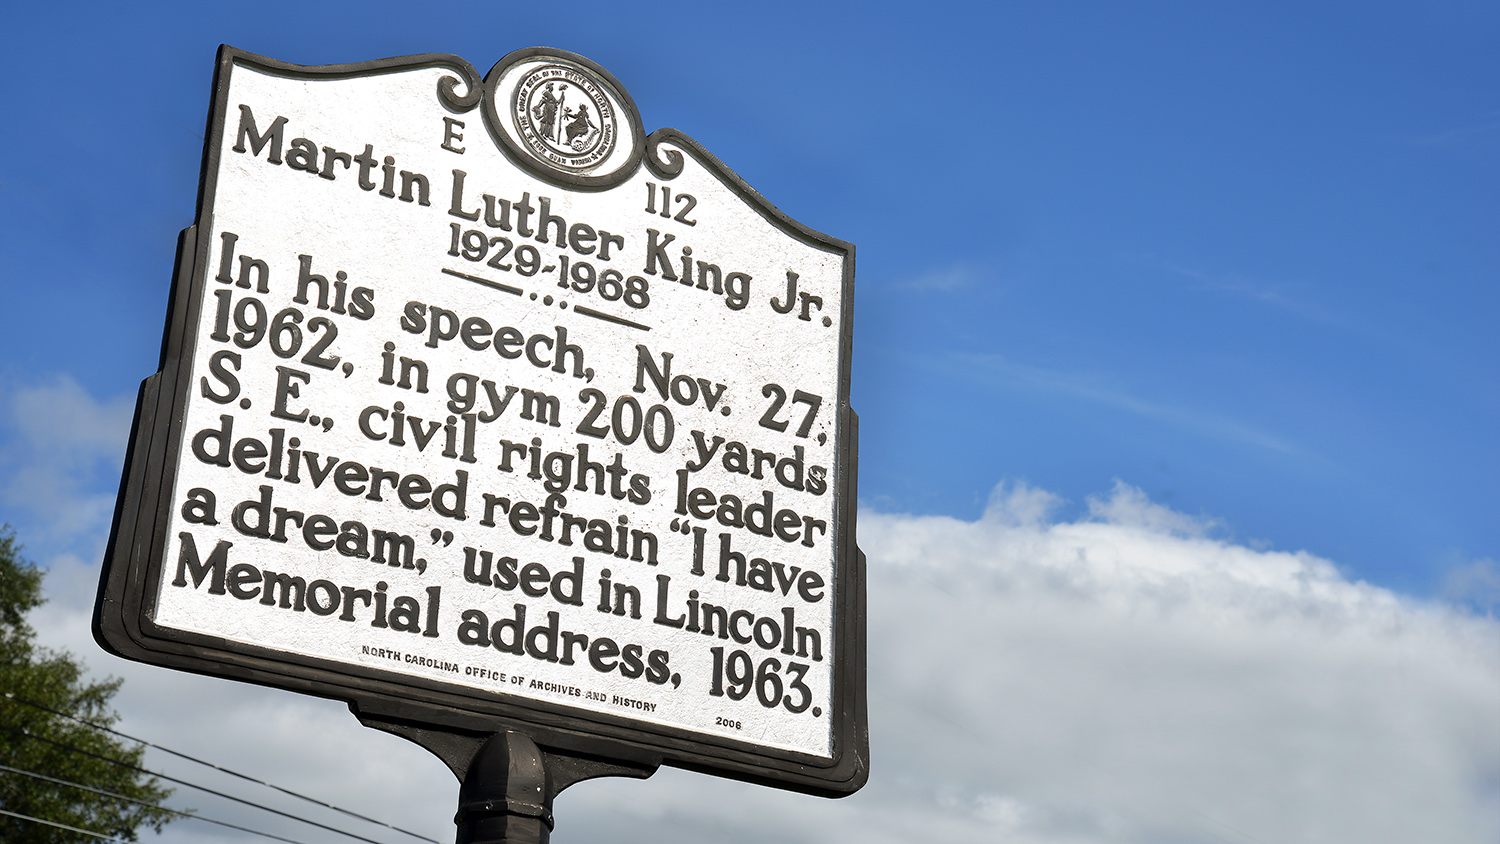 North Carolina historical marker for Dr. Martin Luther King's speech given in Rocky Mount.